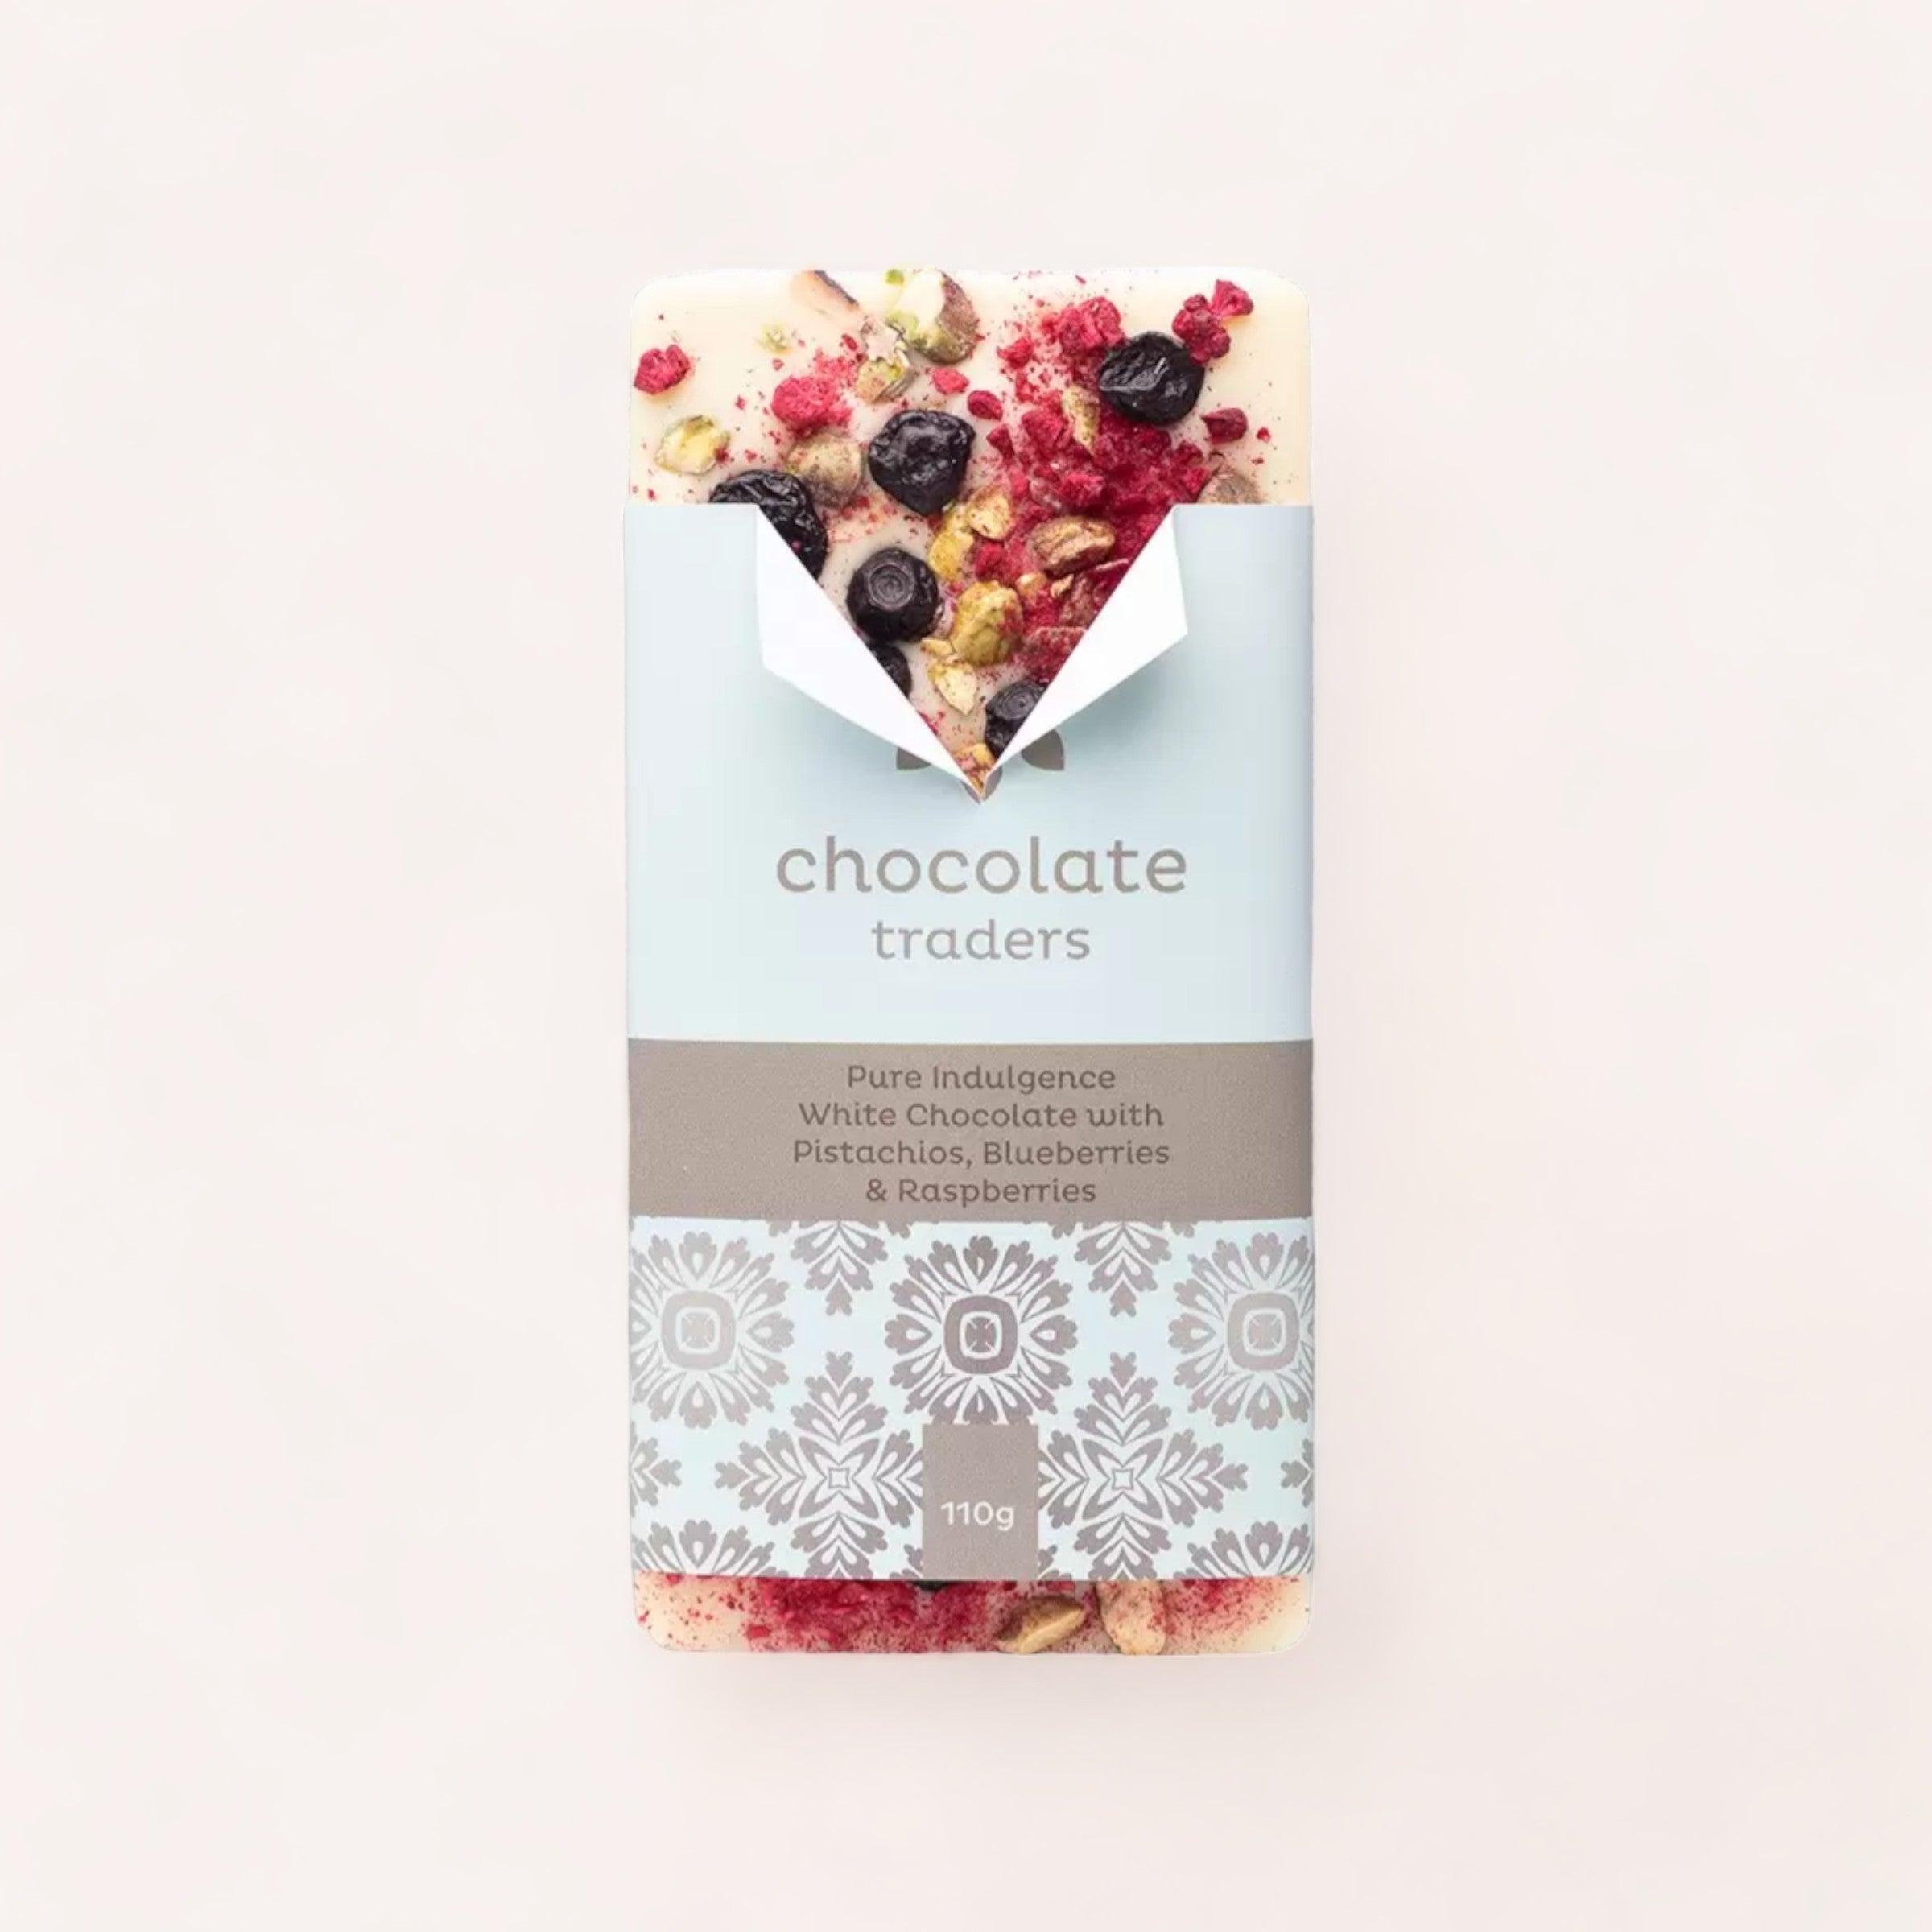 A gourmet Pure Indulgence Pistachios, Blueberries & Raspberries white chocolate bar by Chocolate Traders, presented in stylish packaging, perfect as a gift from New Zealand.